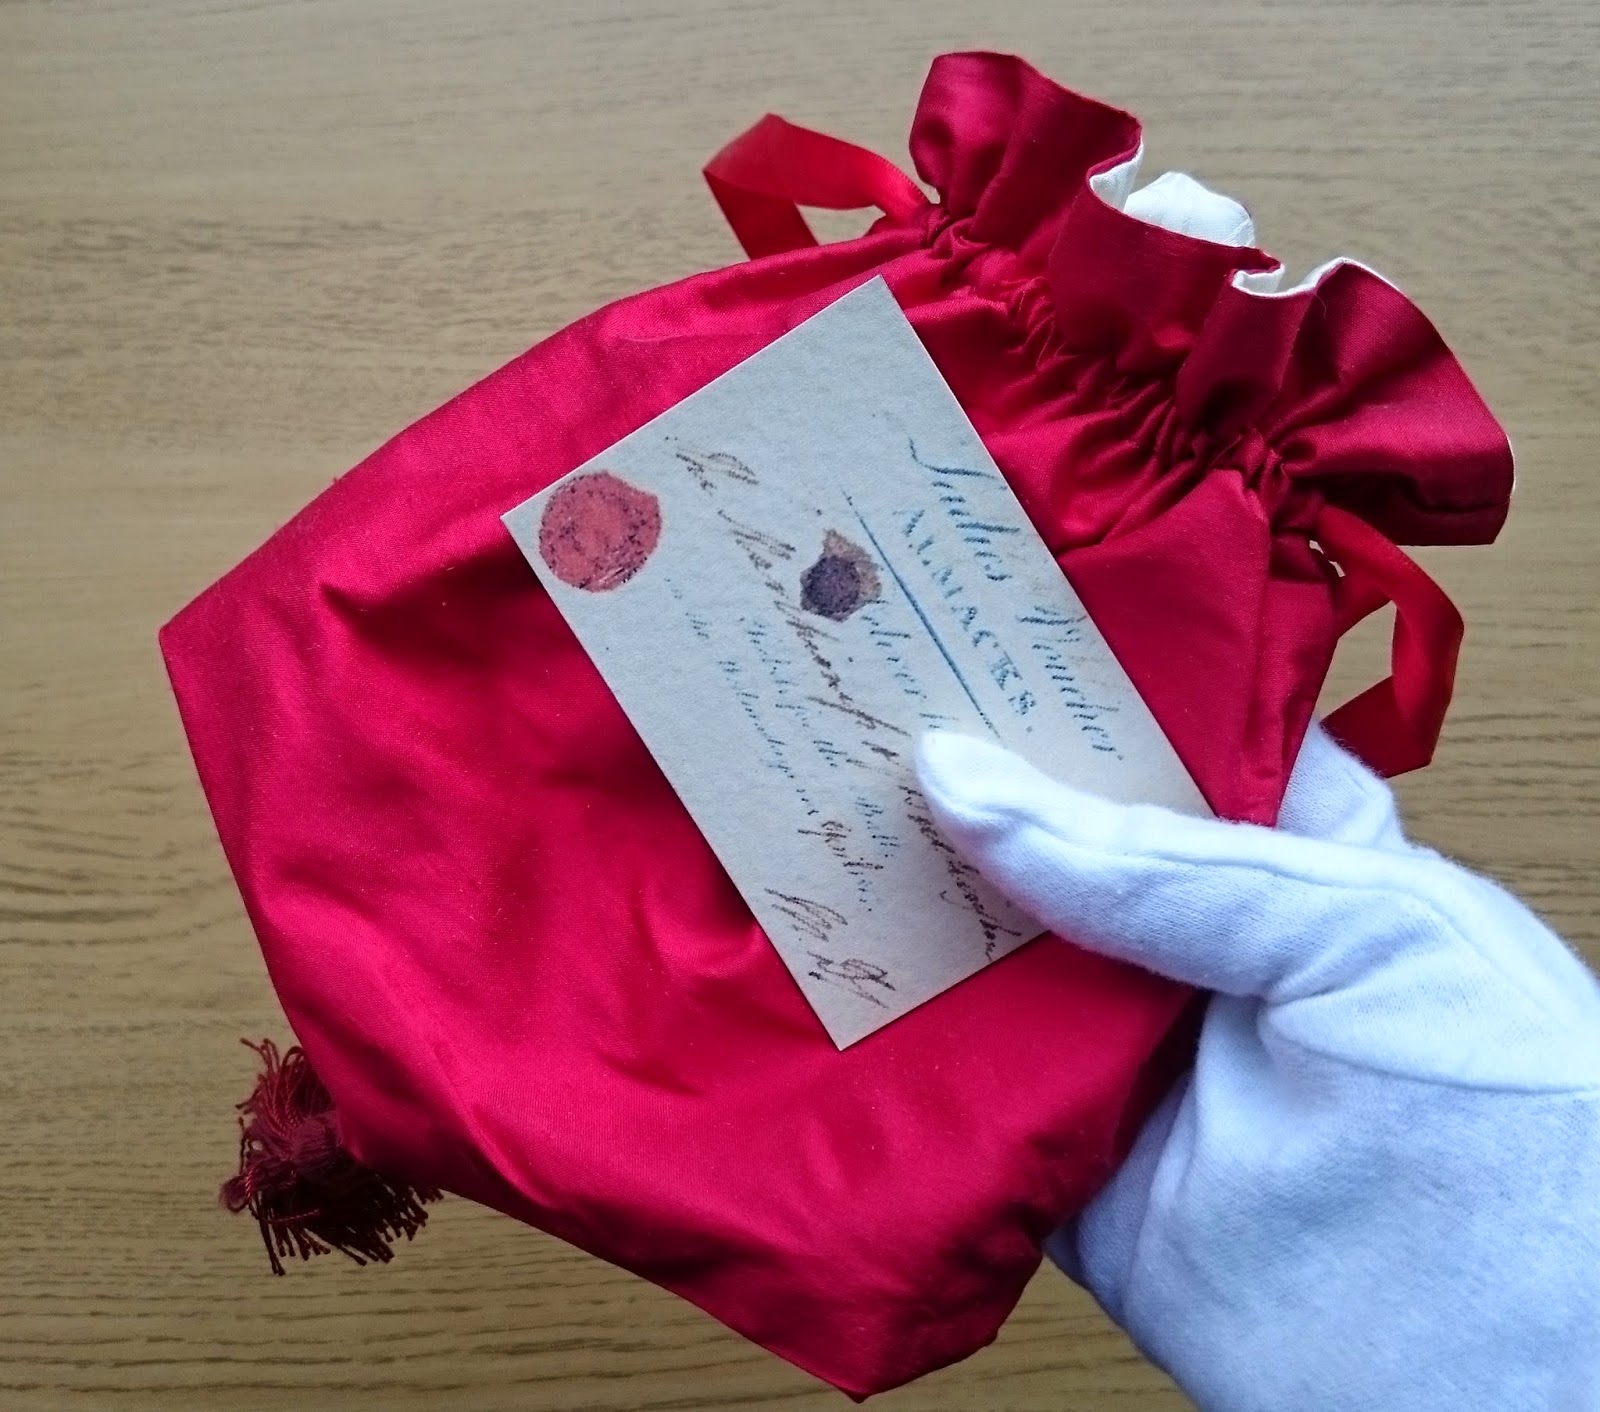 My Regency reticule with a printed copy of the voucher for Almack's  Used with kind permission STG Misc. Box 7 (Almack's Voucher),   © The Huntington Library, San Marino, CA